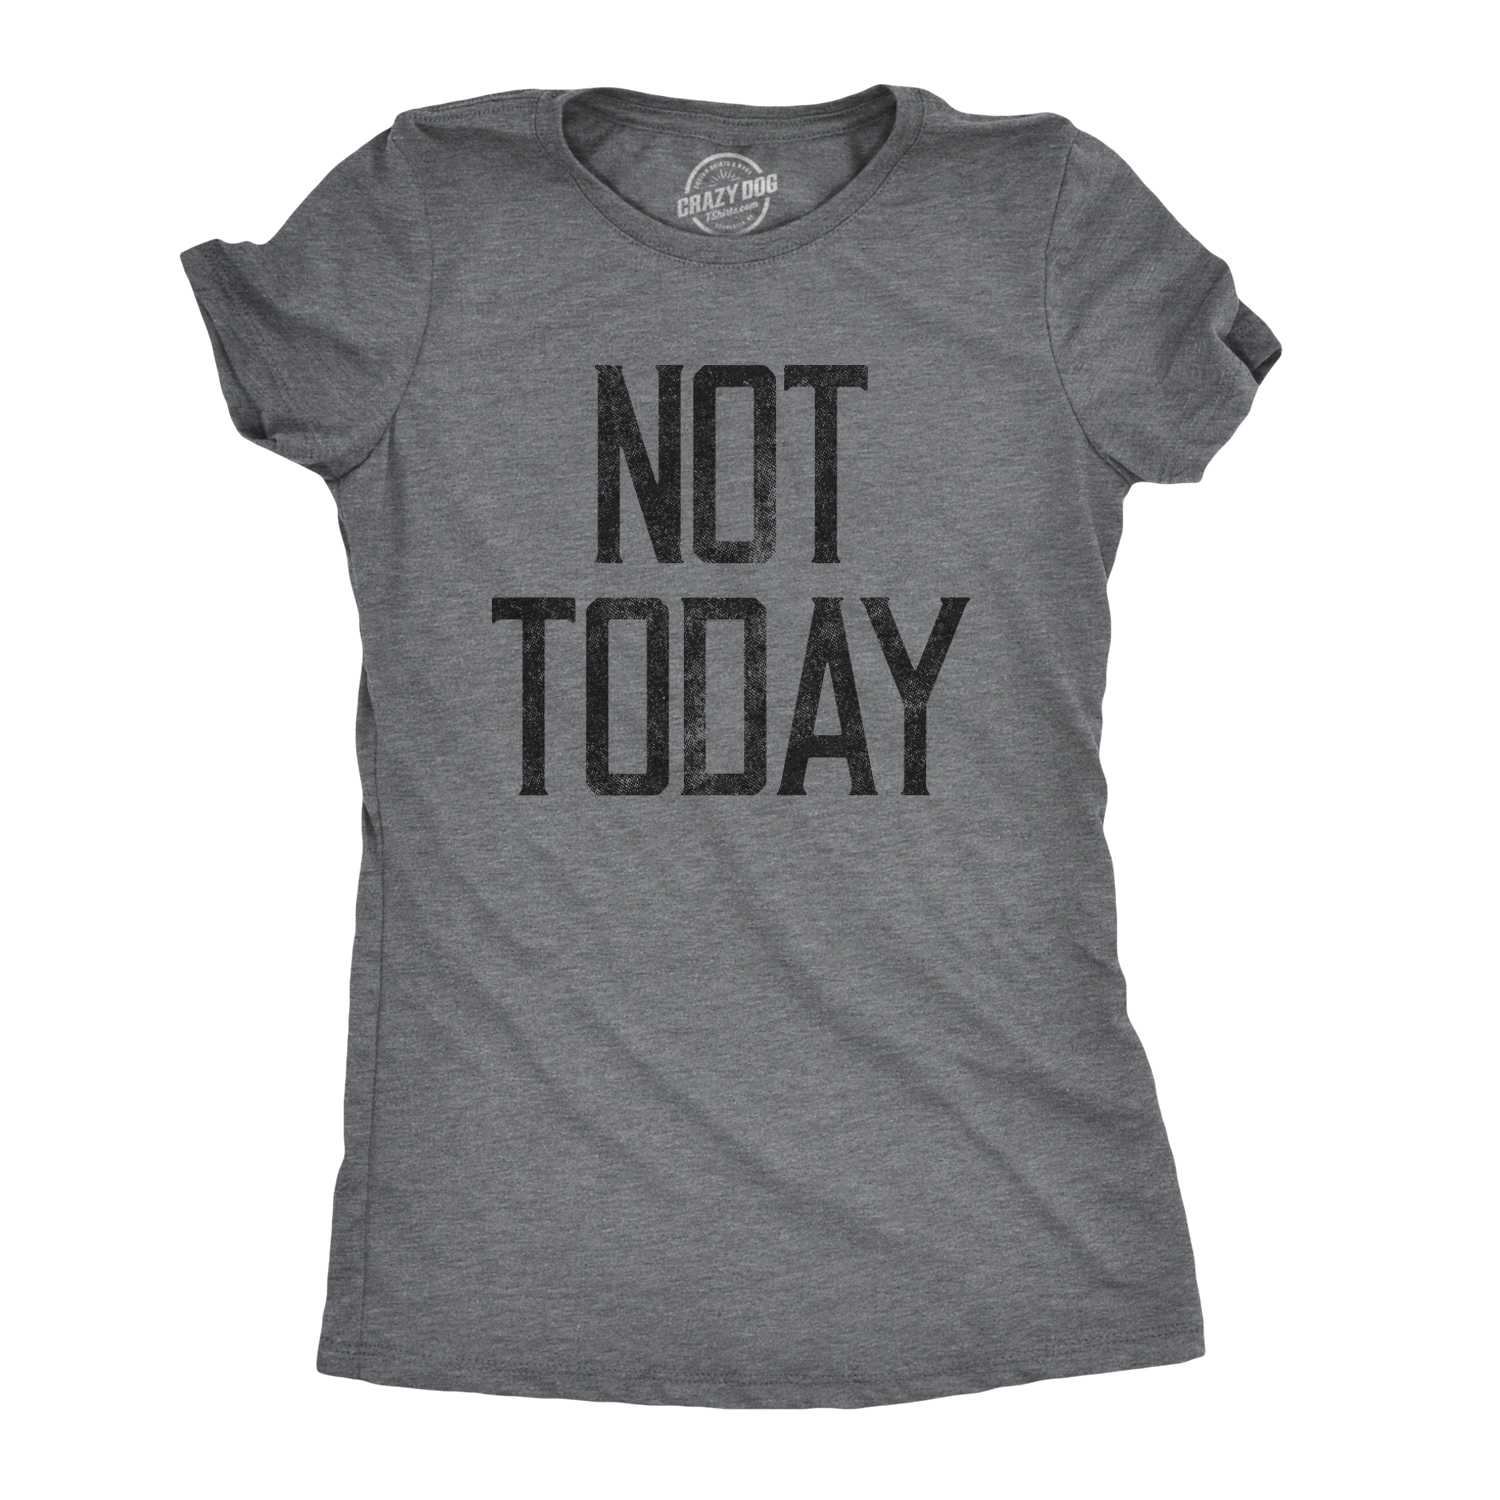 Womens Not Today T shirt Funny Graphic Hilarious Slogan Introvert Cool Humour Womens Graphic Tees - image 1 of 9